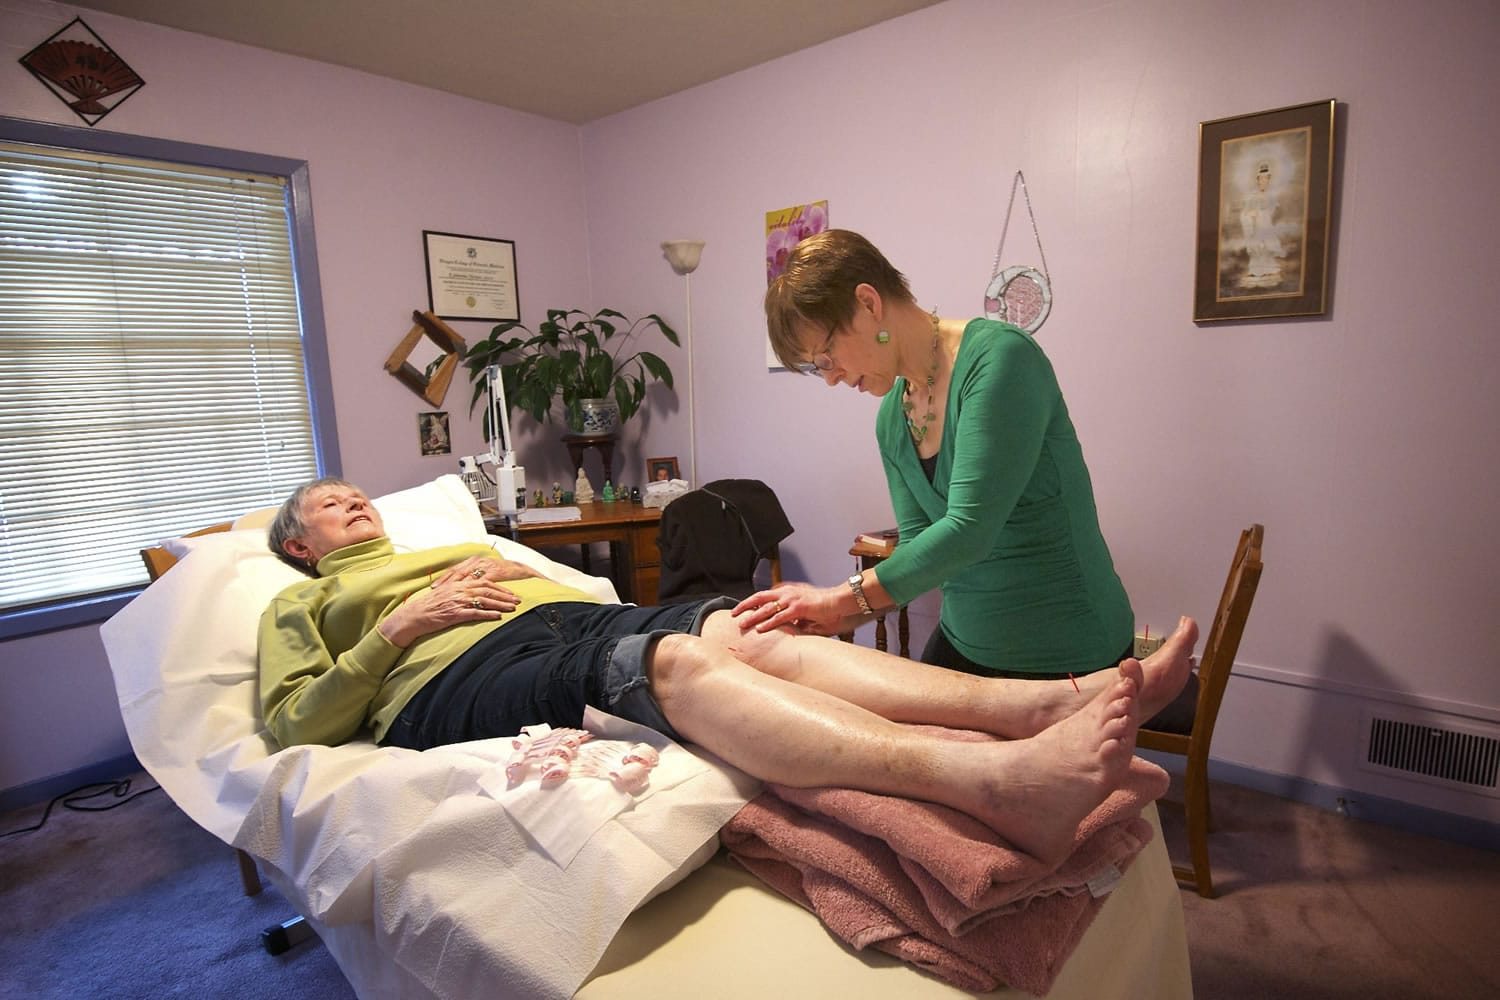 Jowanna Harman-Stever, right, of New Harmony Health in Vancouver, provides acupuncture treatment to patient Virginia Barber, 80, recently.